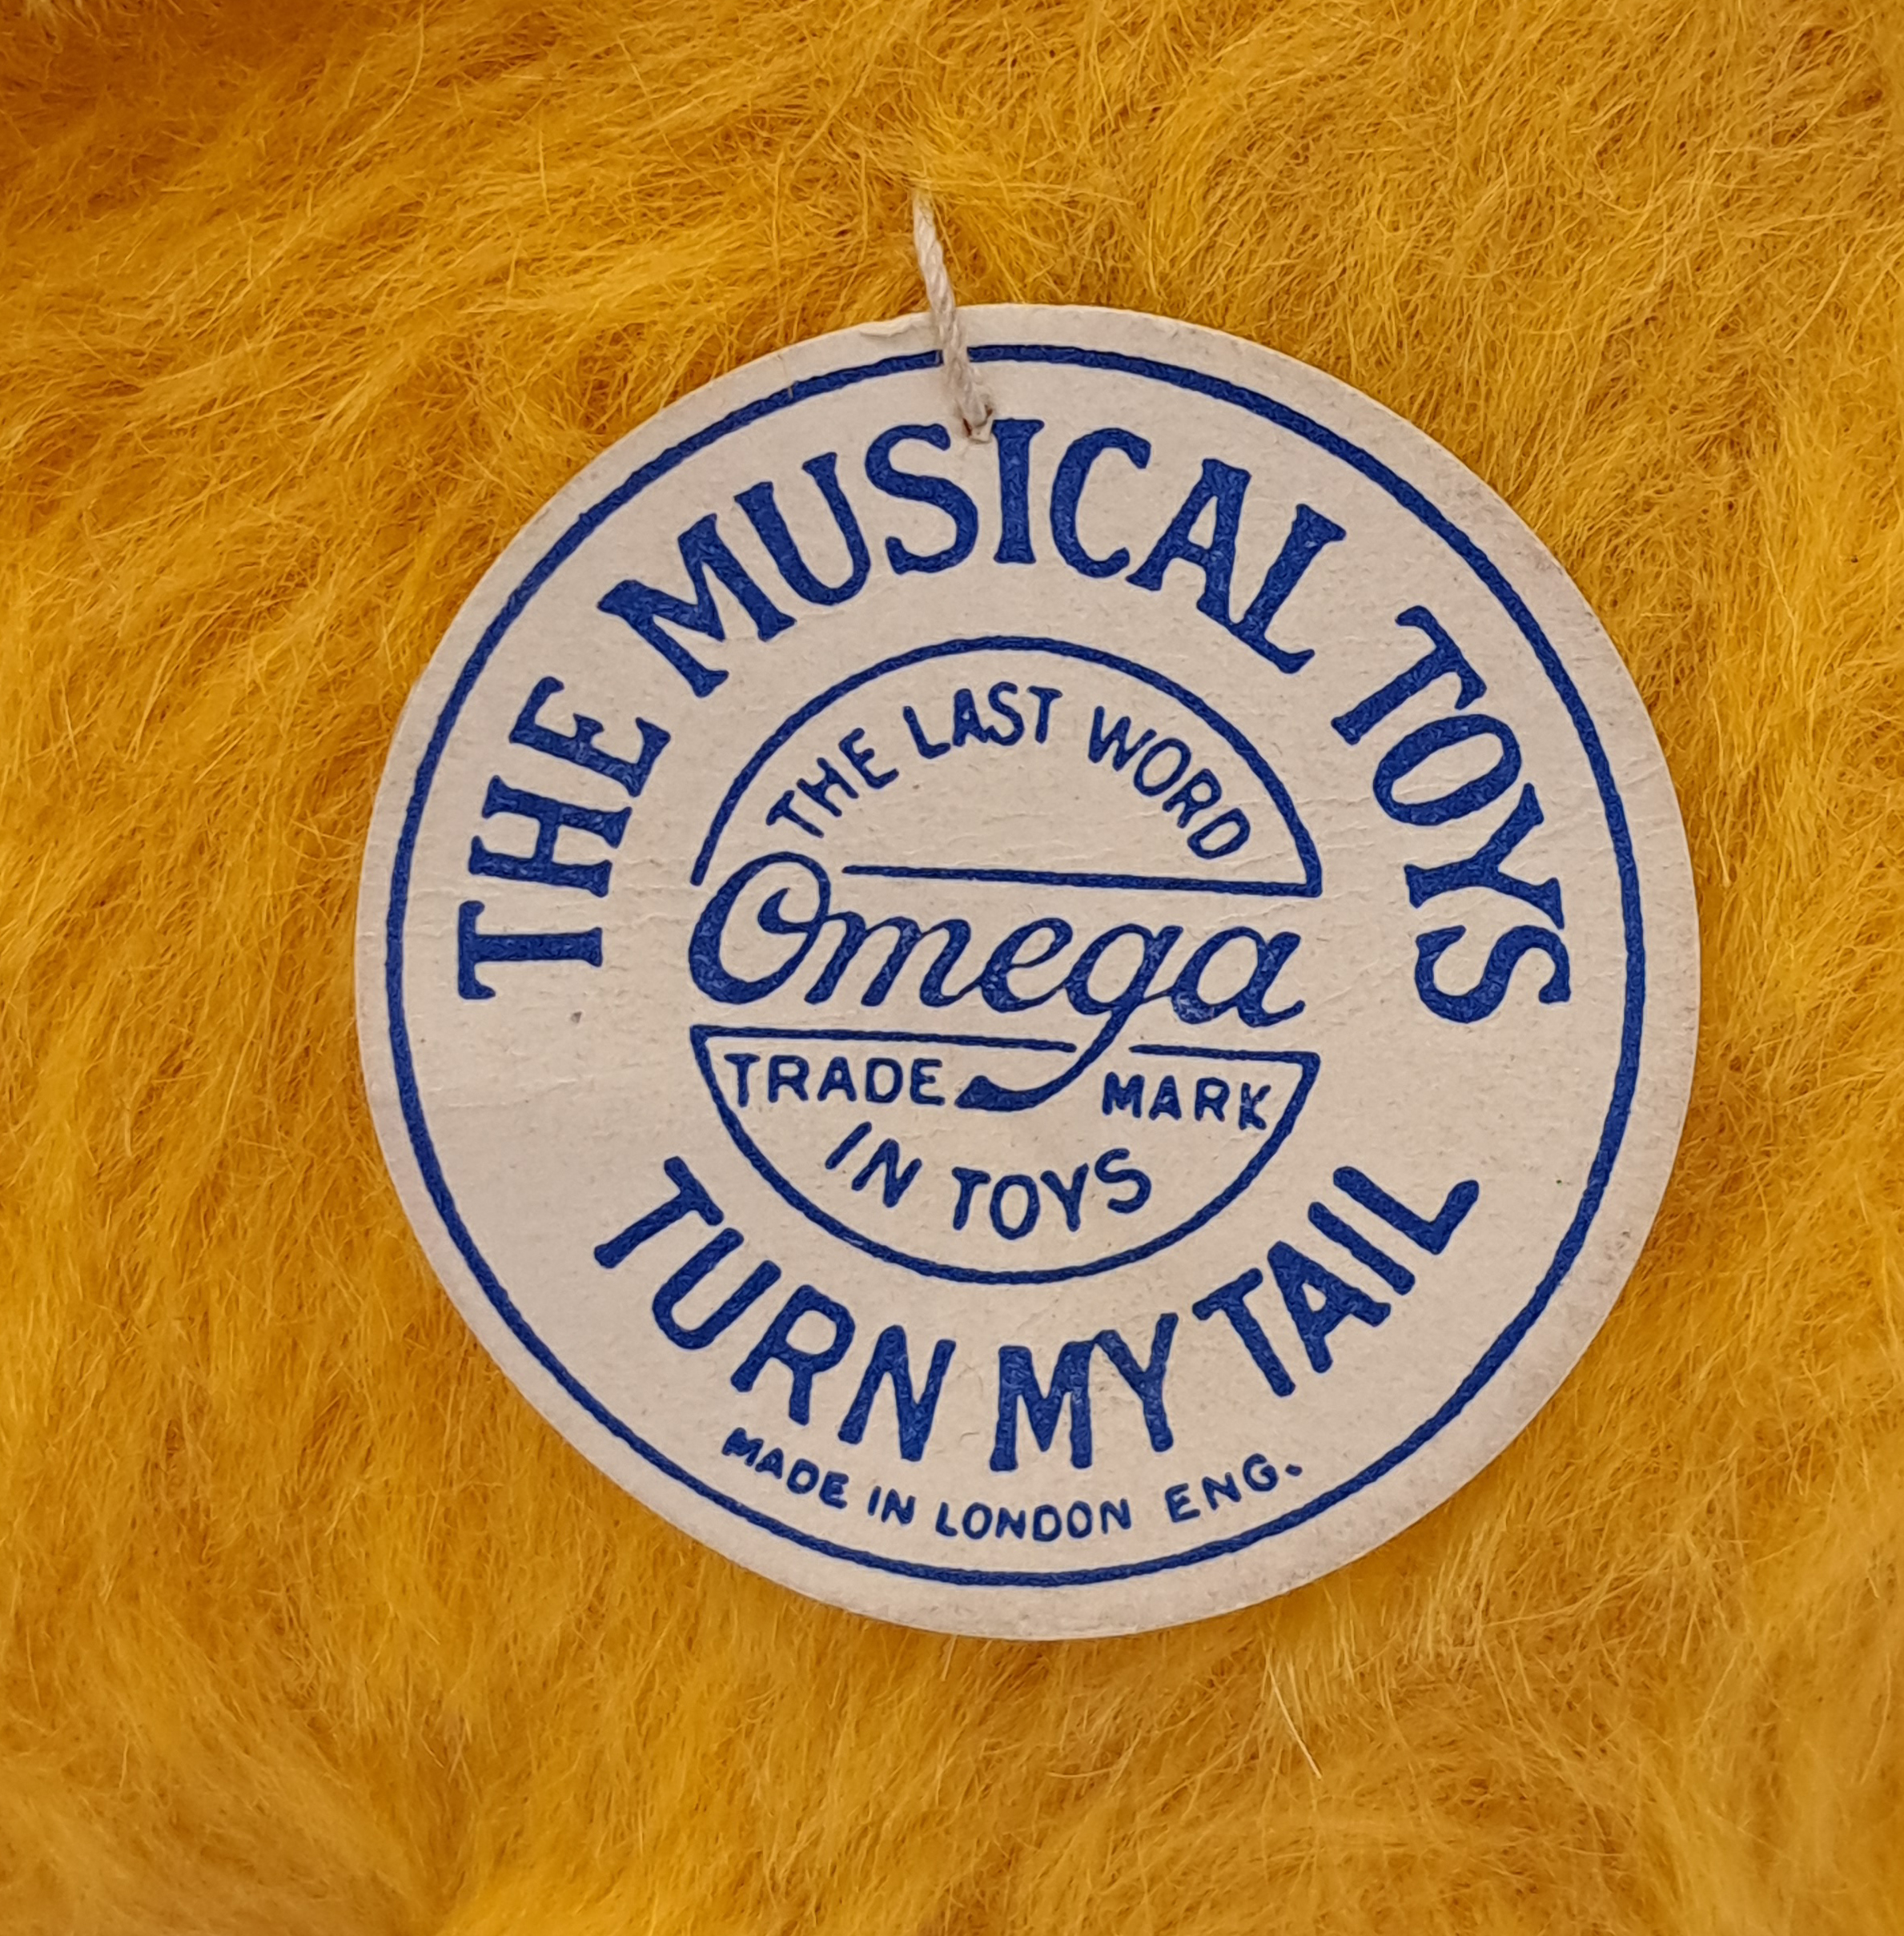 Omega Rabbit (British United Toy Manufacturing Co. Ltd) with original paper tag - Image 3 of 3